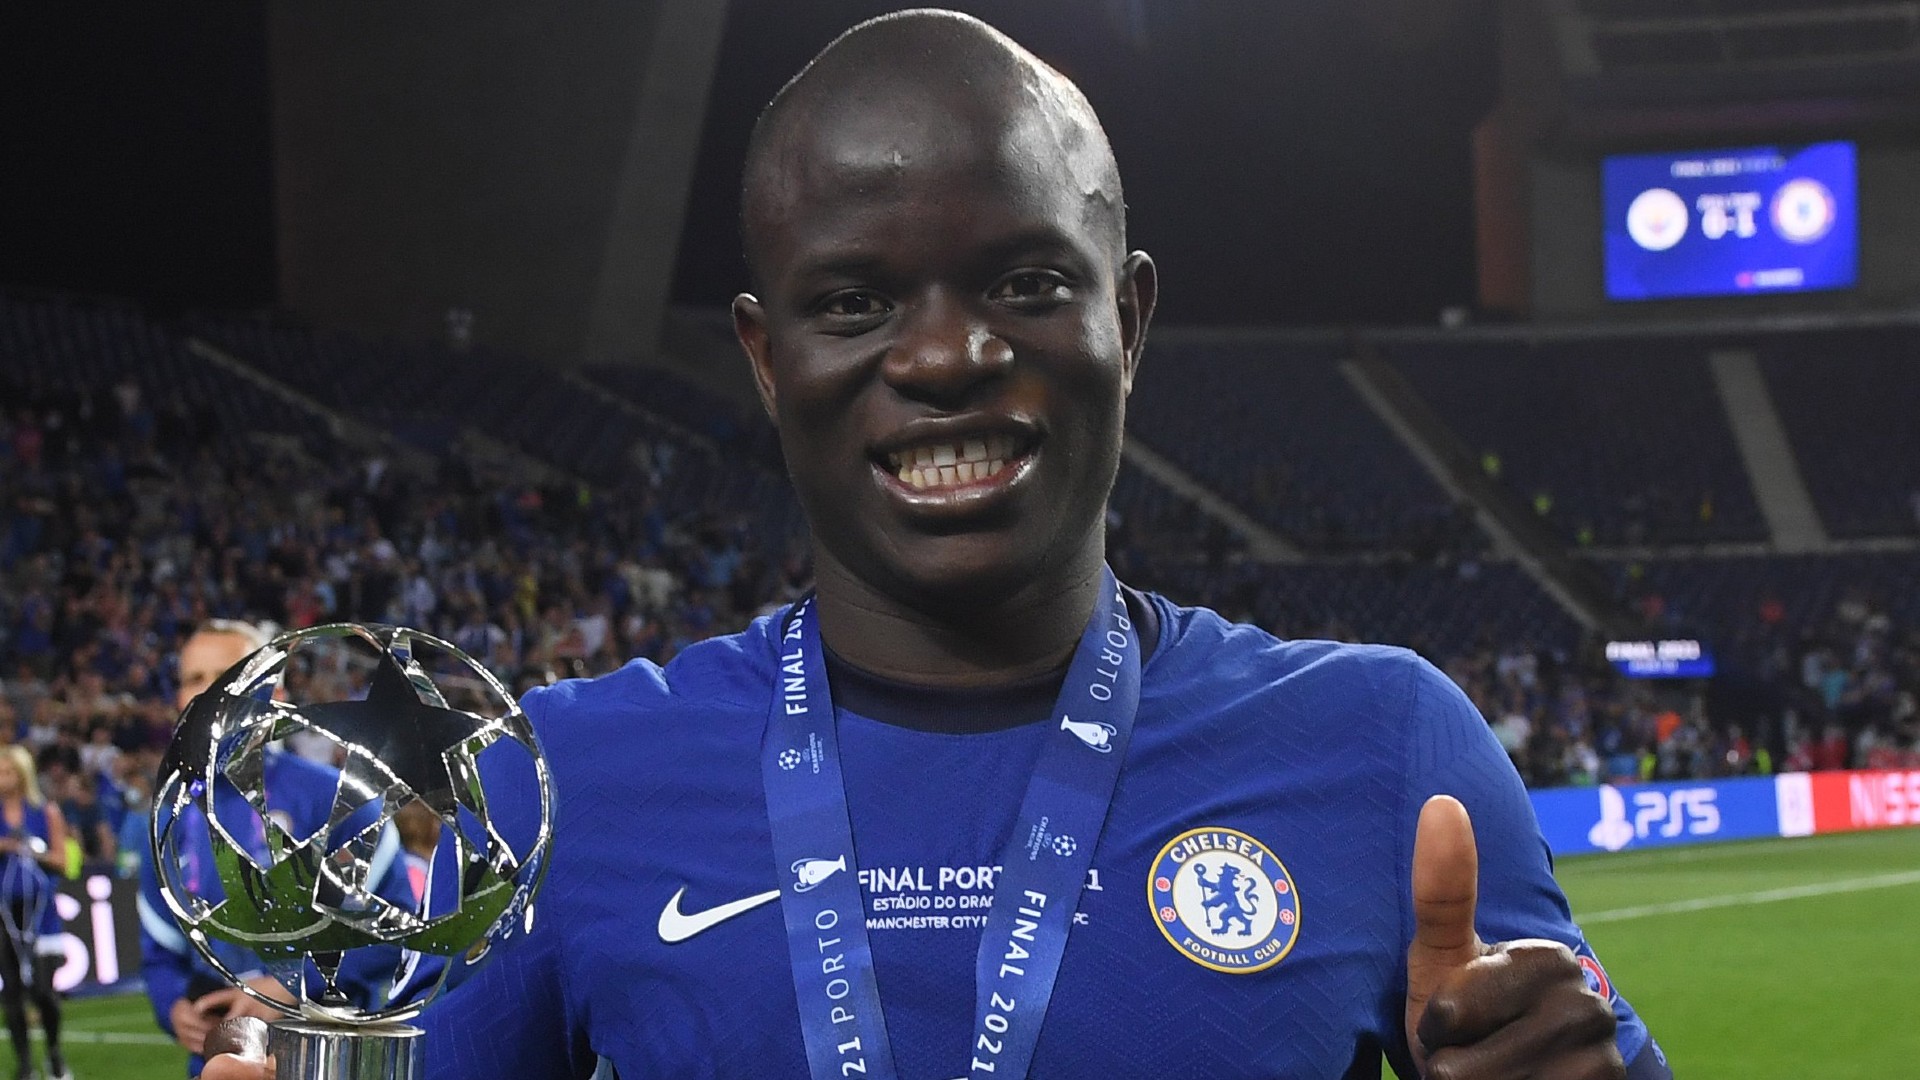 N'Golo Kante outrun, outjumped and outworked and outdid City in CL final